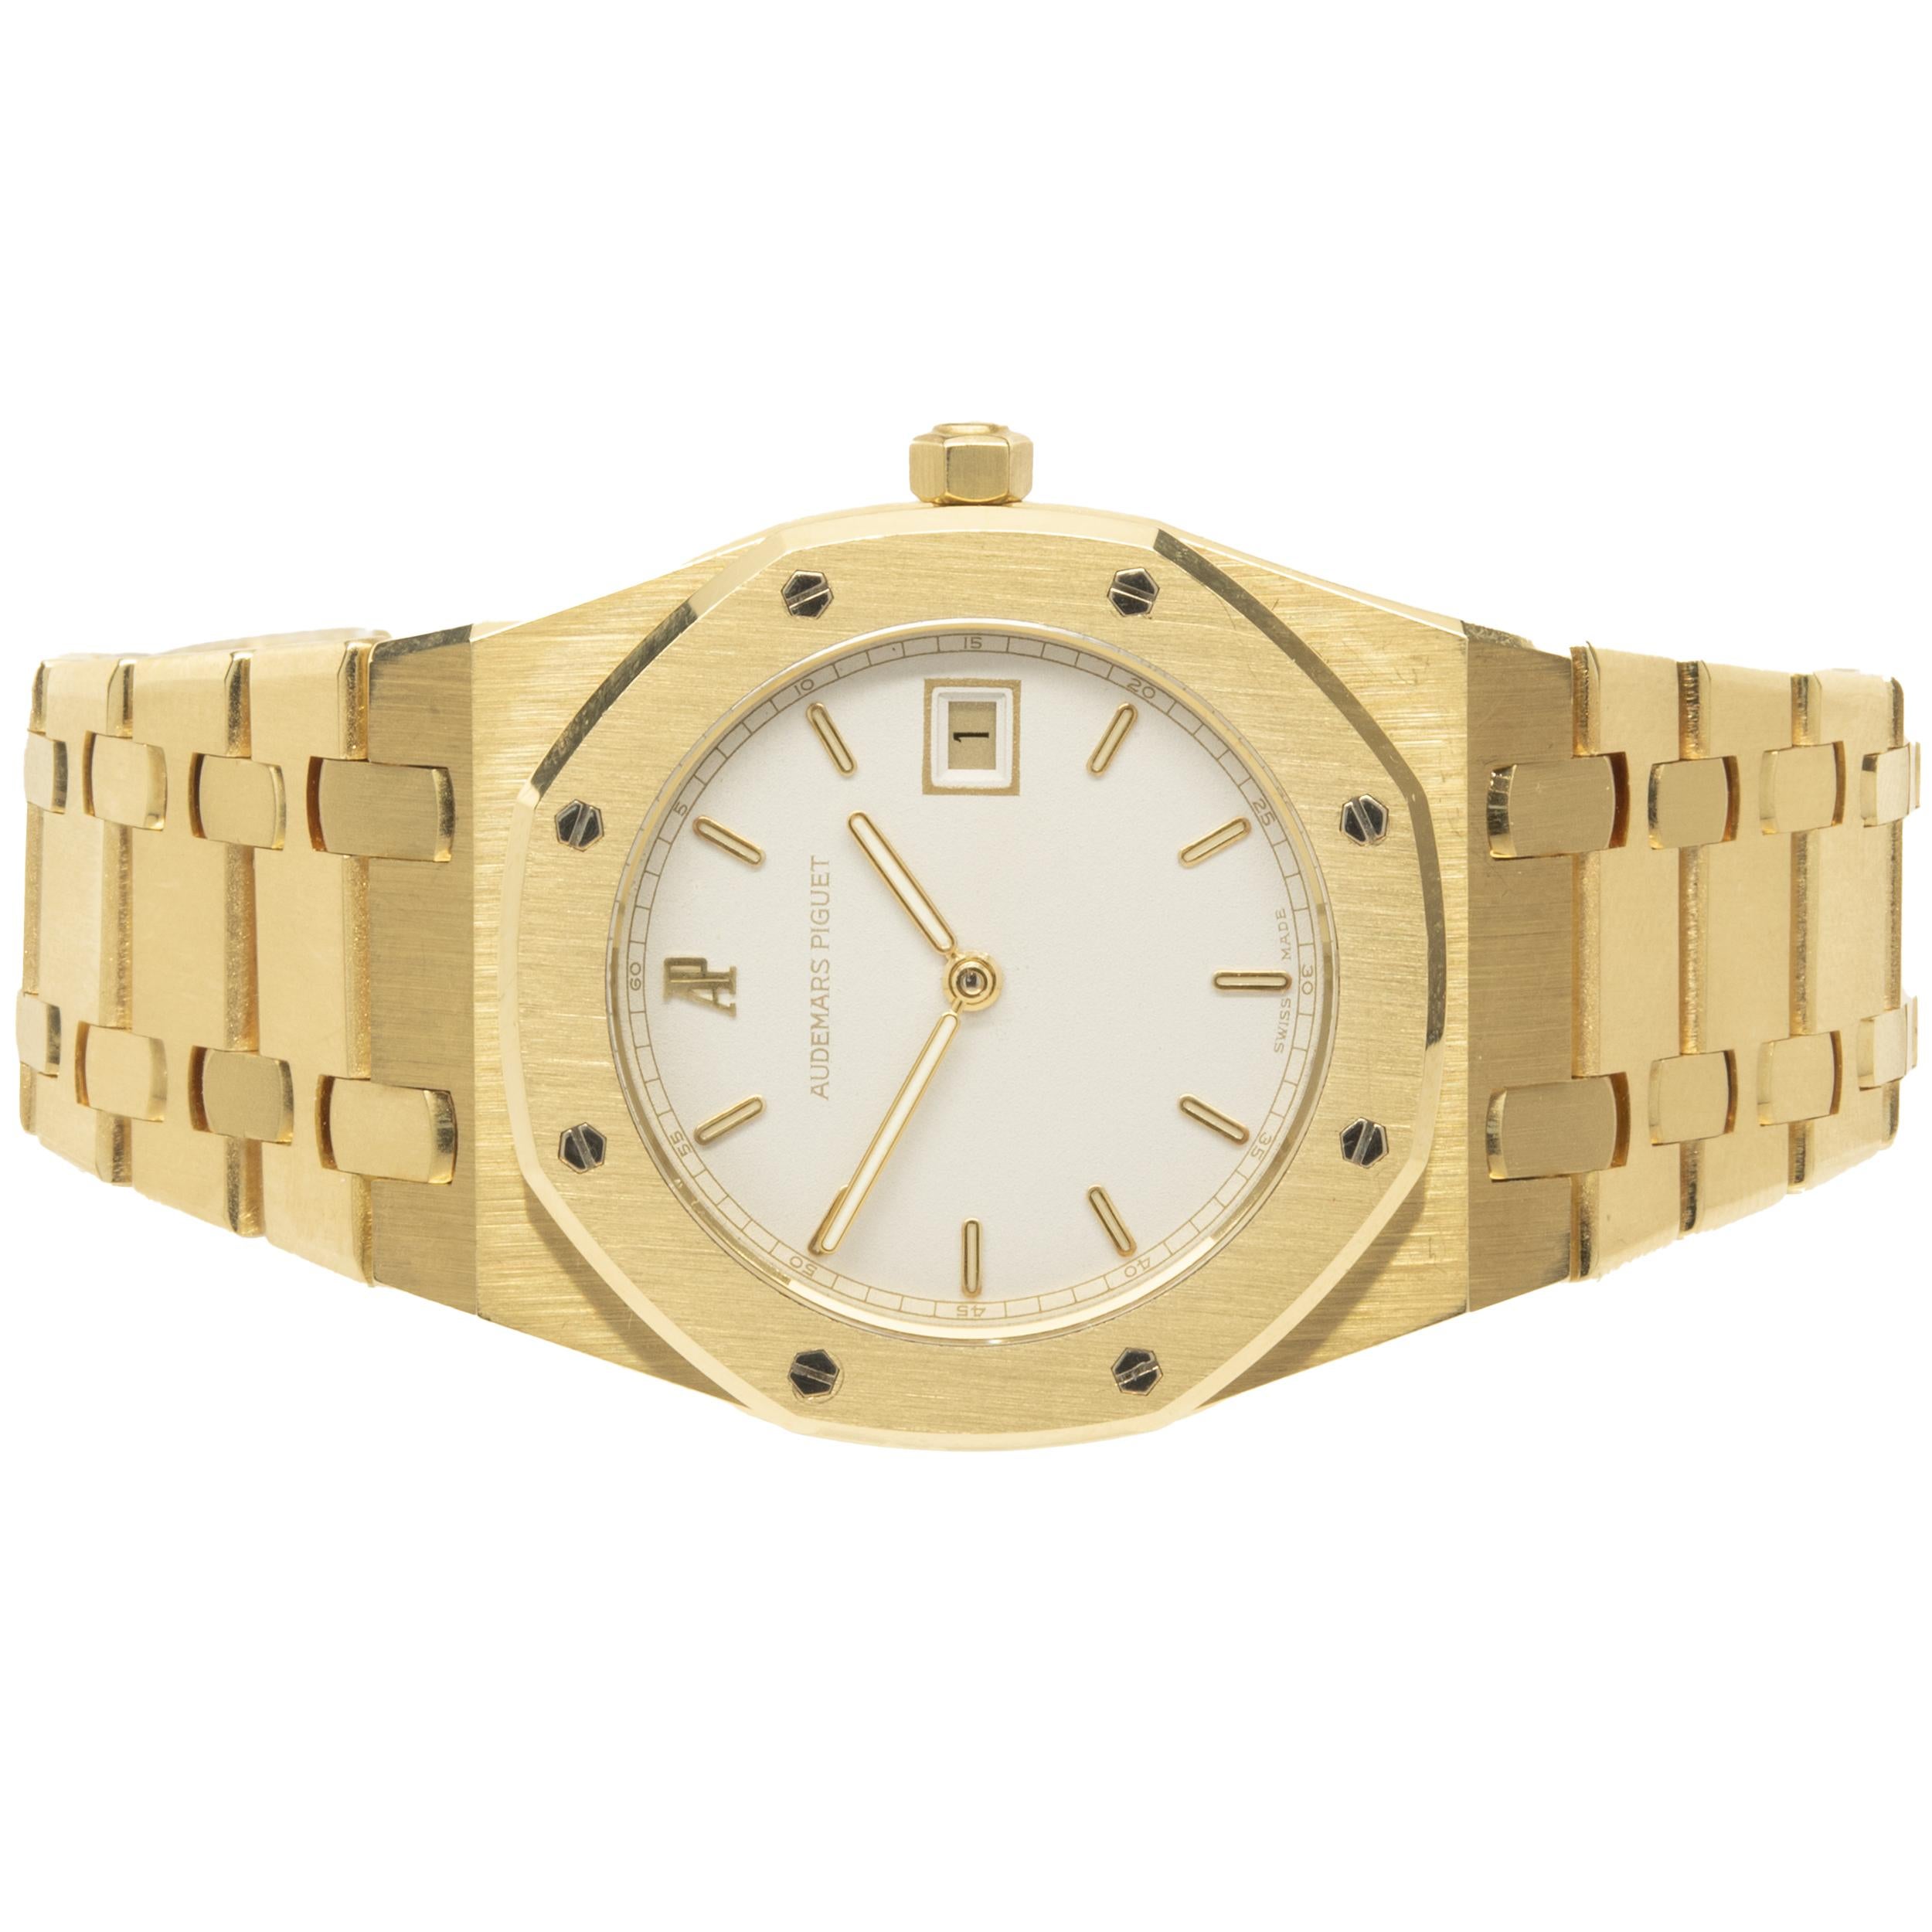 Movement: quartz
Function: hours, minutes, date 
Case: 33mm 18K yellow gold case, smooth bezel, sapphire crystal, push pull crown
Band: 18K yellow gold Royal Oak bracelet, fold over clasp
Dial: white stick 
Reference: 56175BA.0789B
Serial: